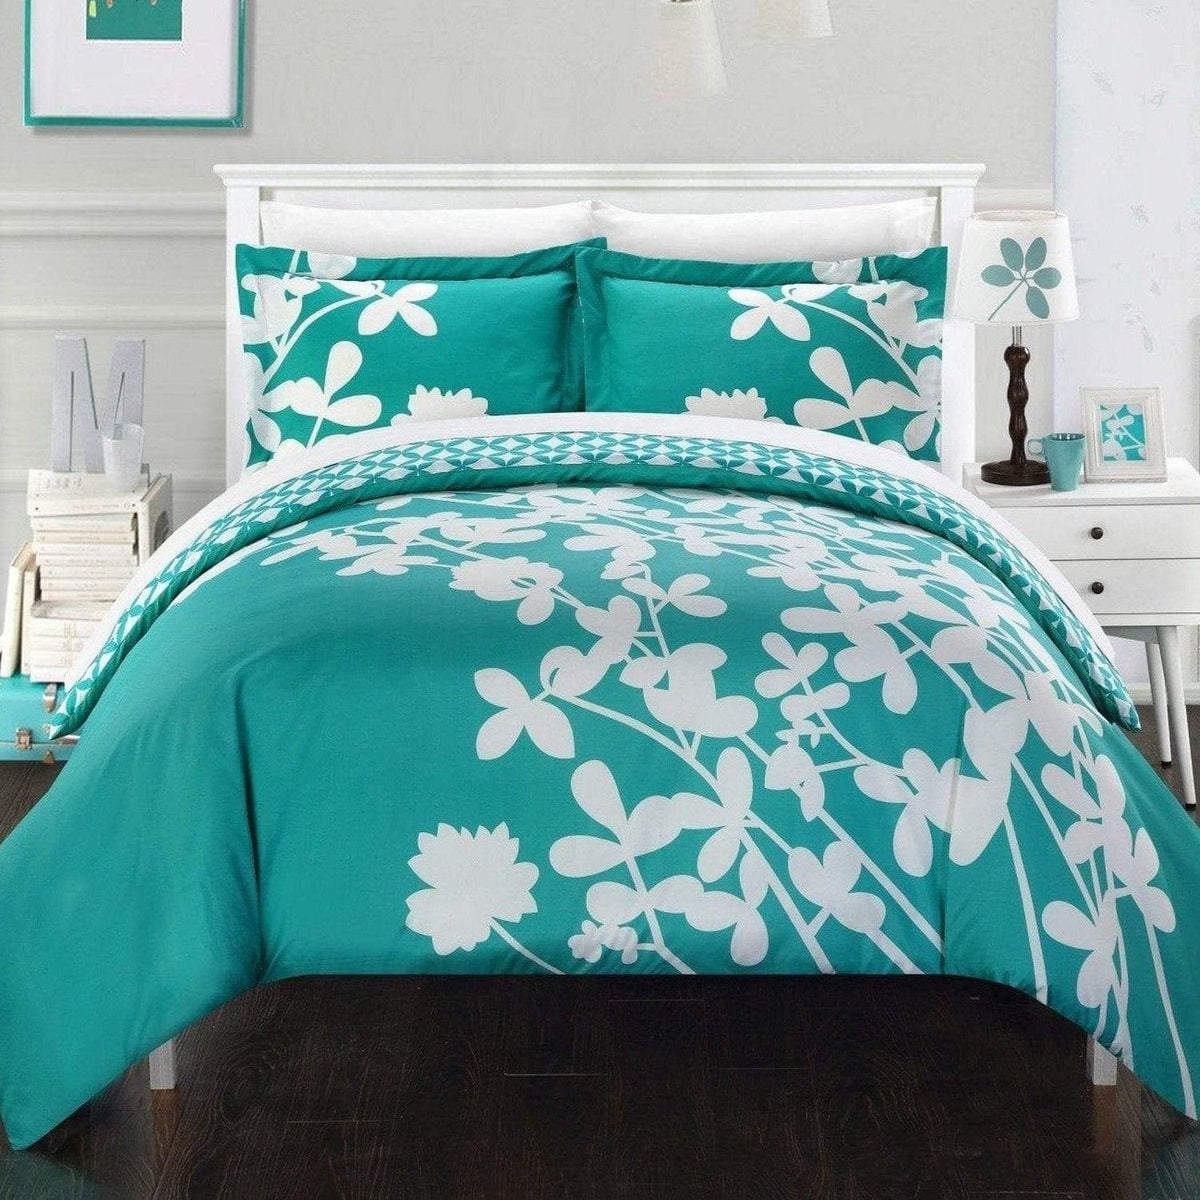 Chic Home Calla Lily 7 Piece Floral Duvet Cover Set Turquoise